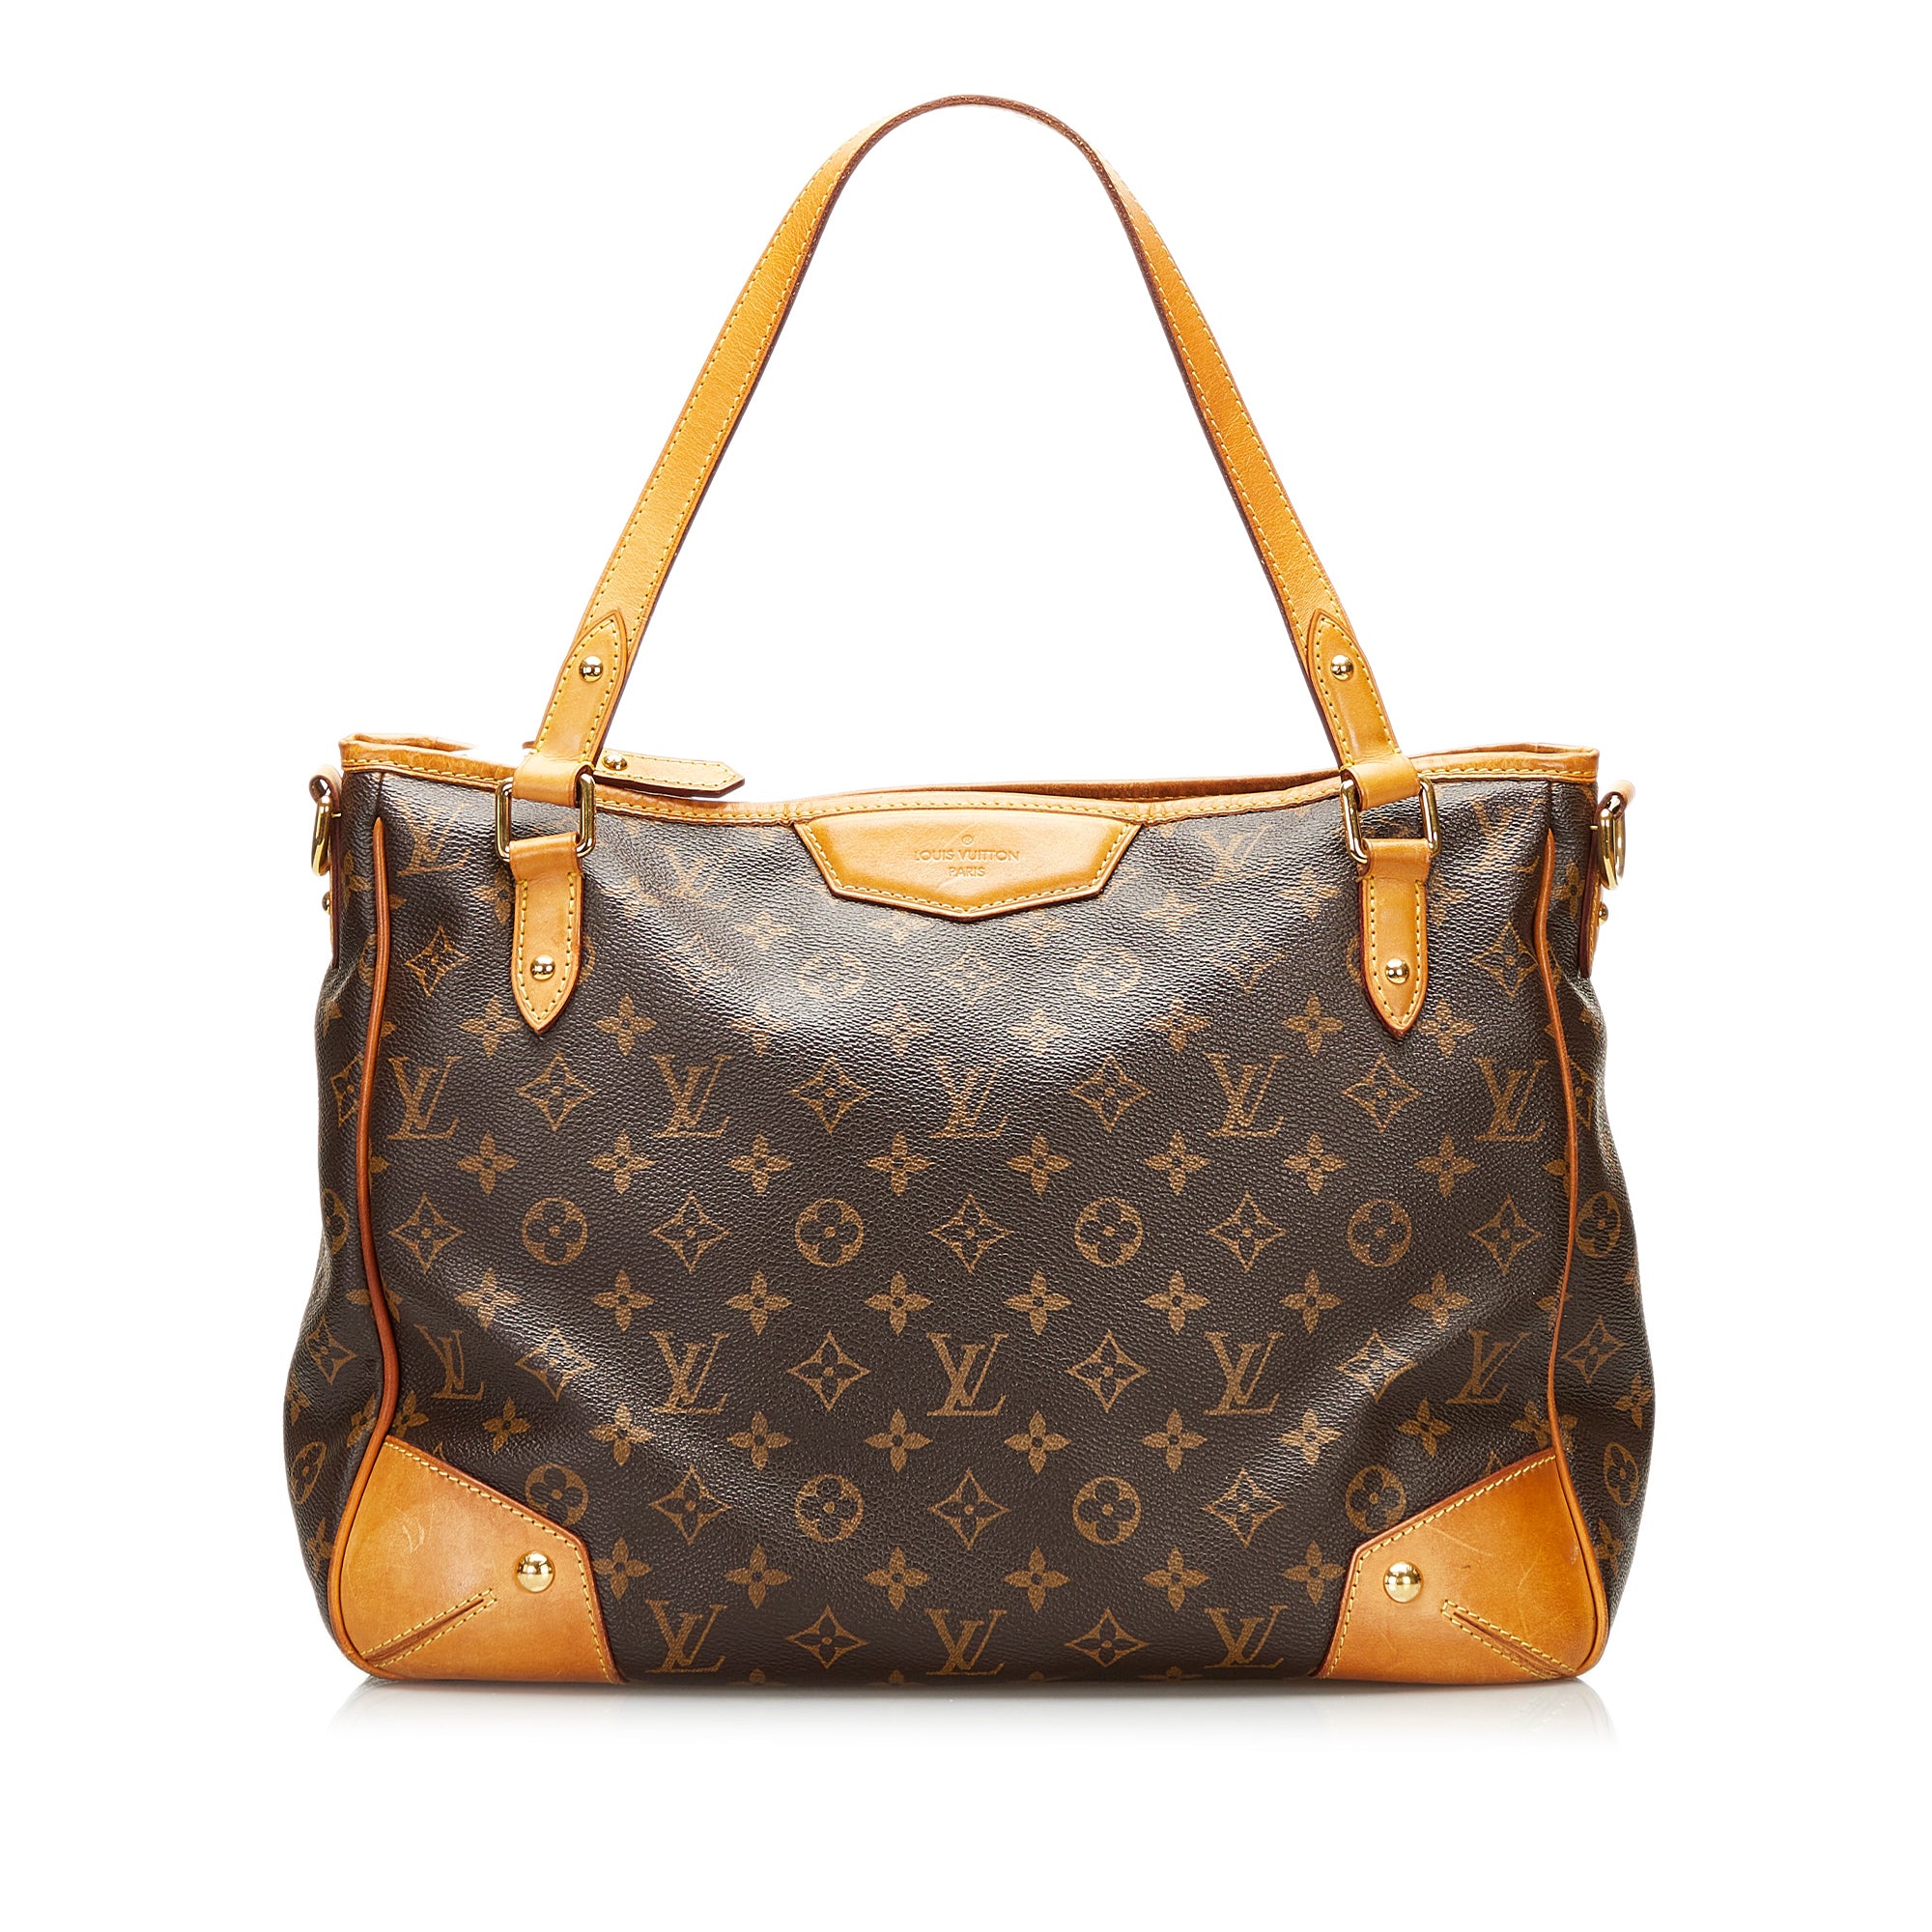 Sold at Auction: LOUIS VUITTON Sac Neverfull toile Monogram